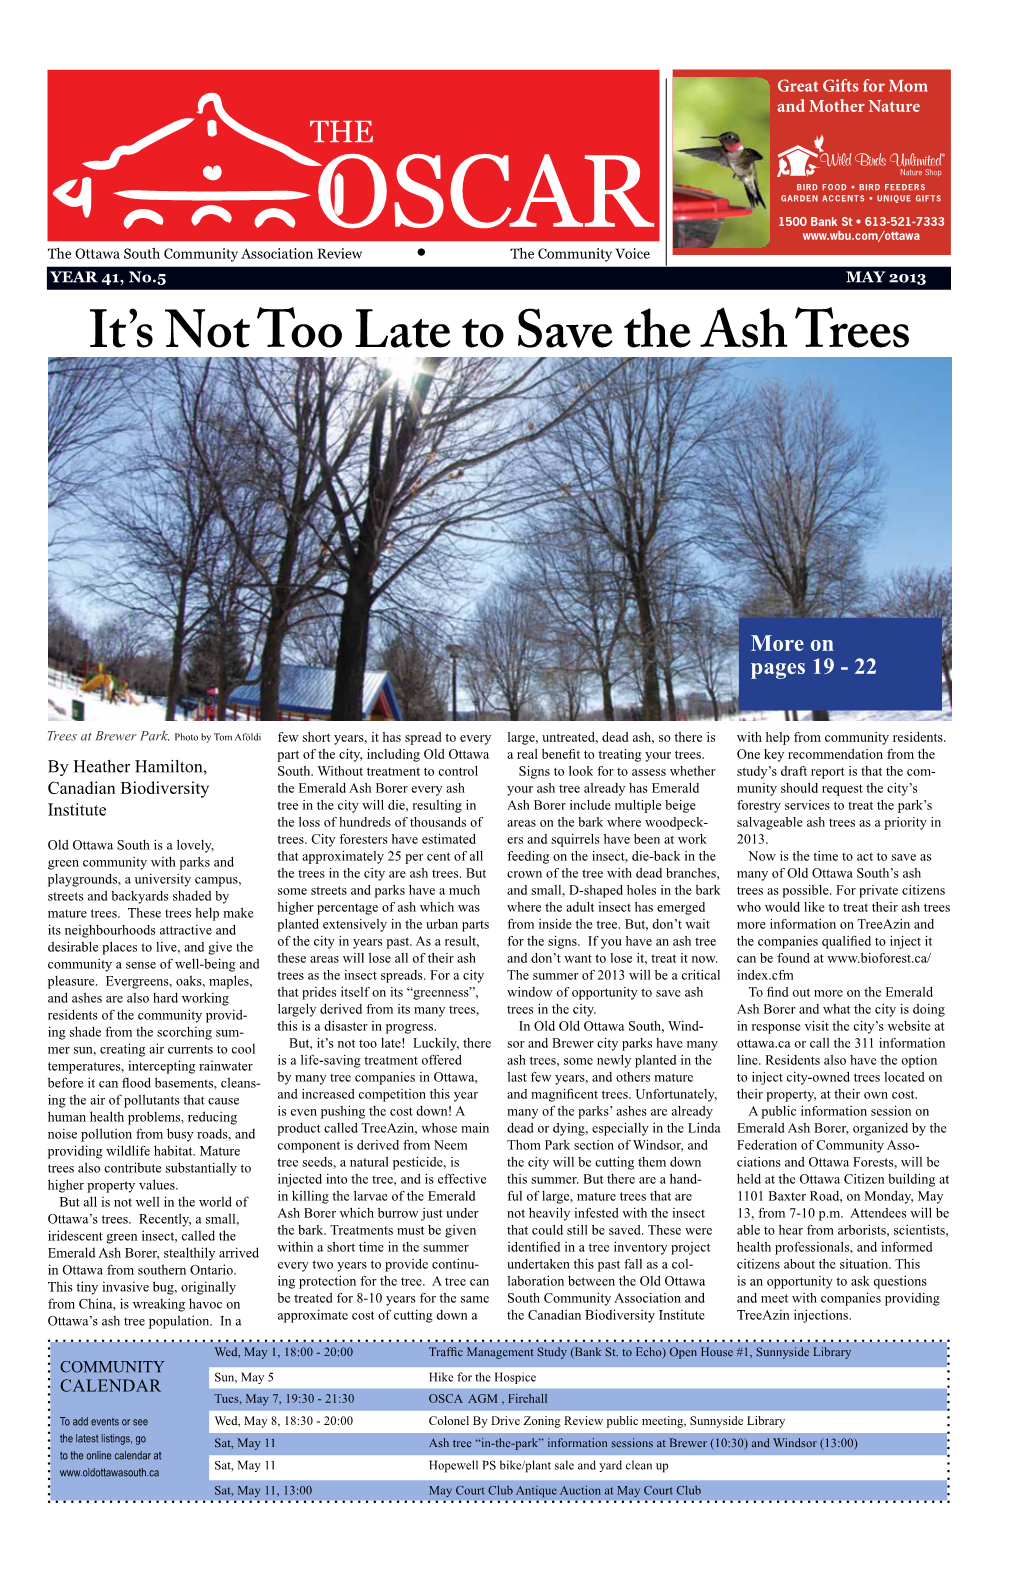 It's Not Too Late to Save the Ash Trees